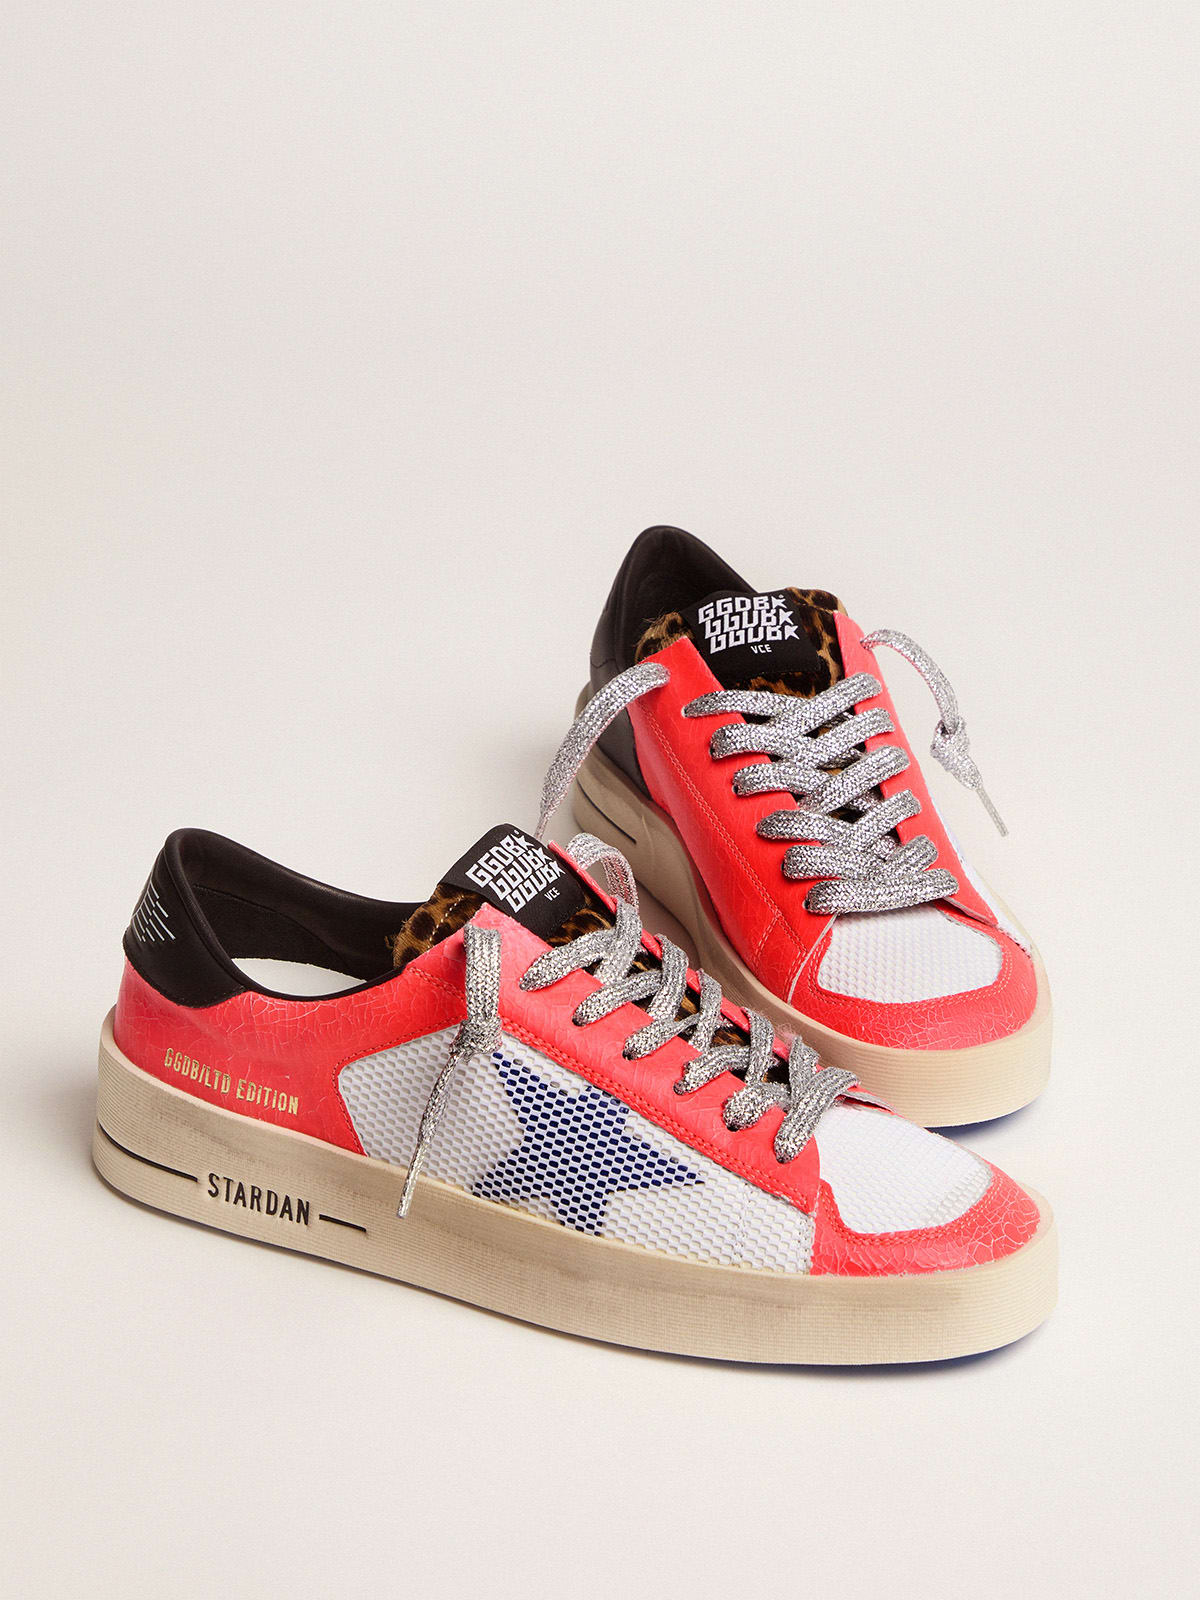 Golden Goose - Women's LAB Limited Edition Stardan sneakers in craquelé leather and pony skin in 